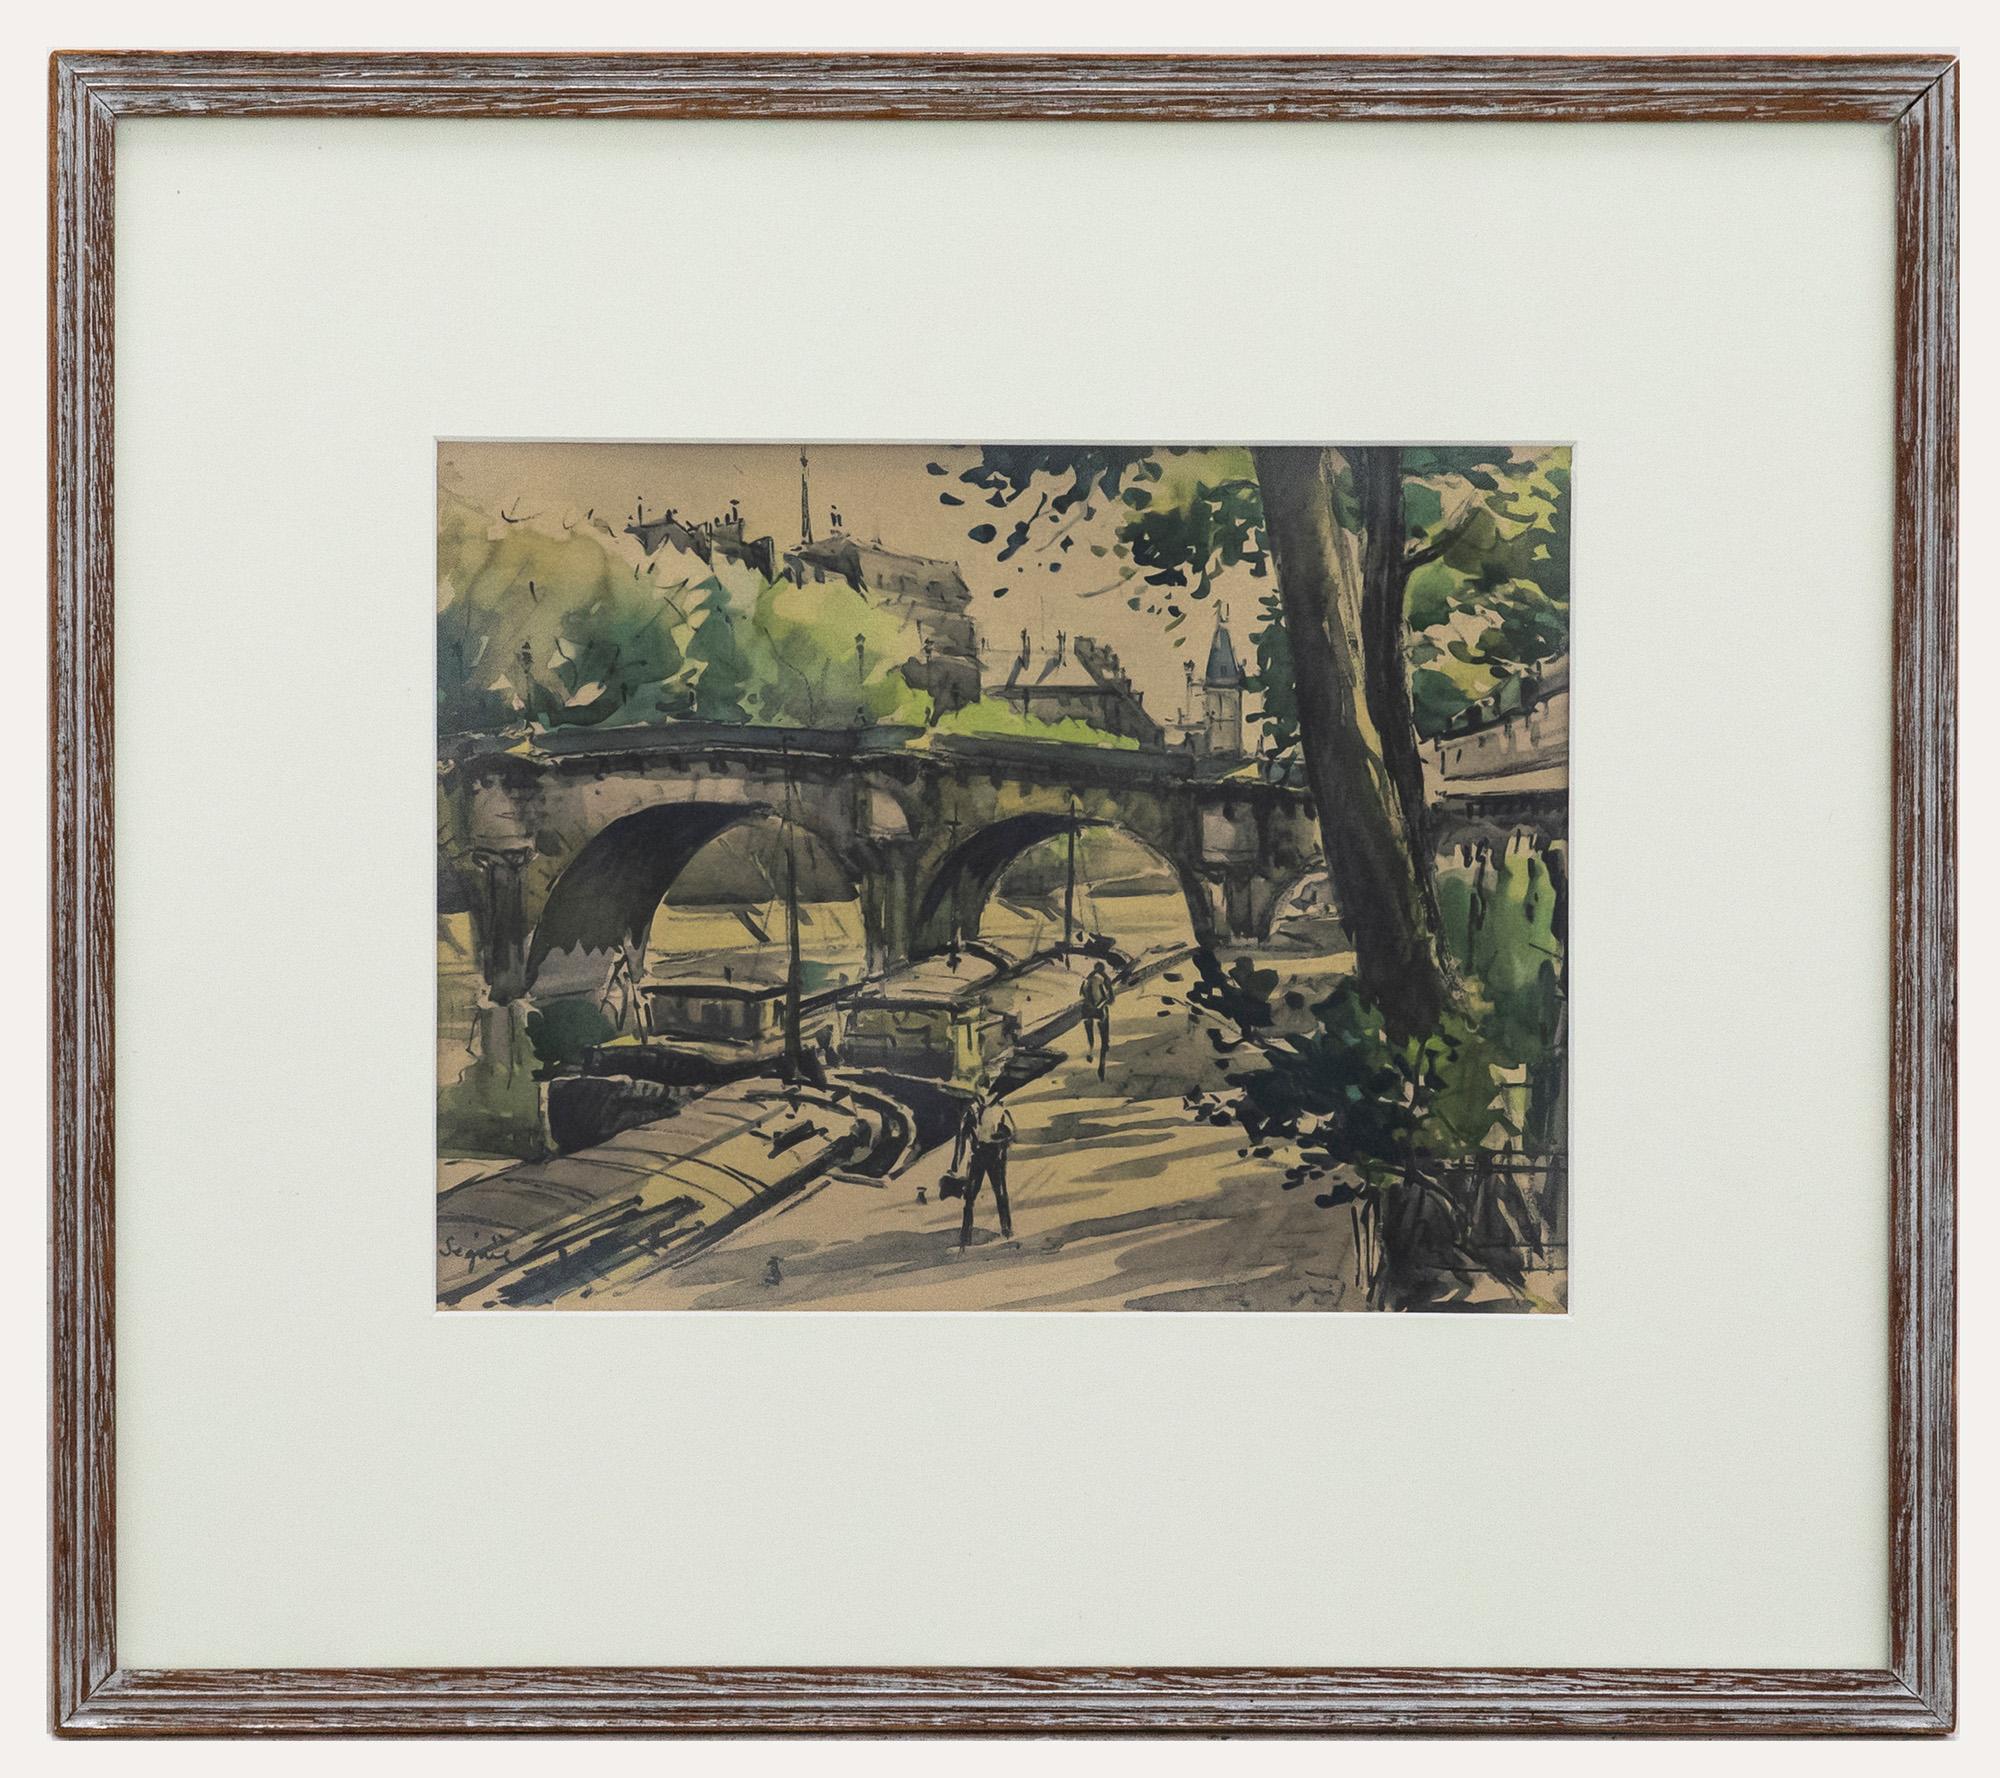 Unknown Landscape Art - Framed 20th Century Watercolour - Canal-side in Summer